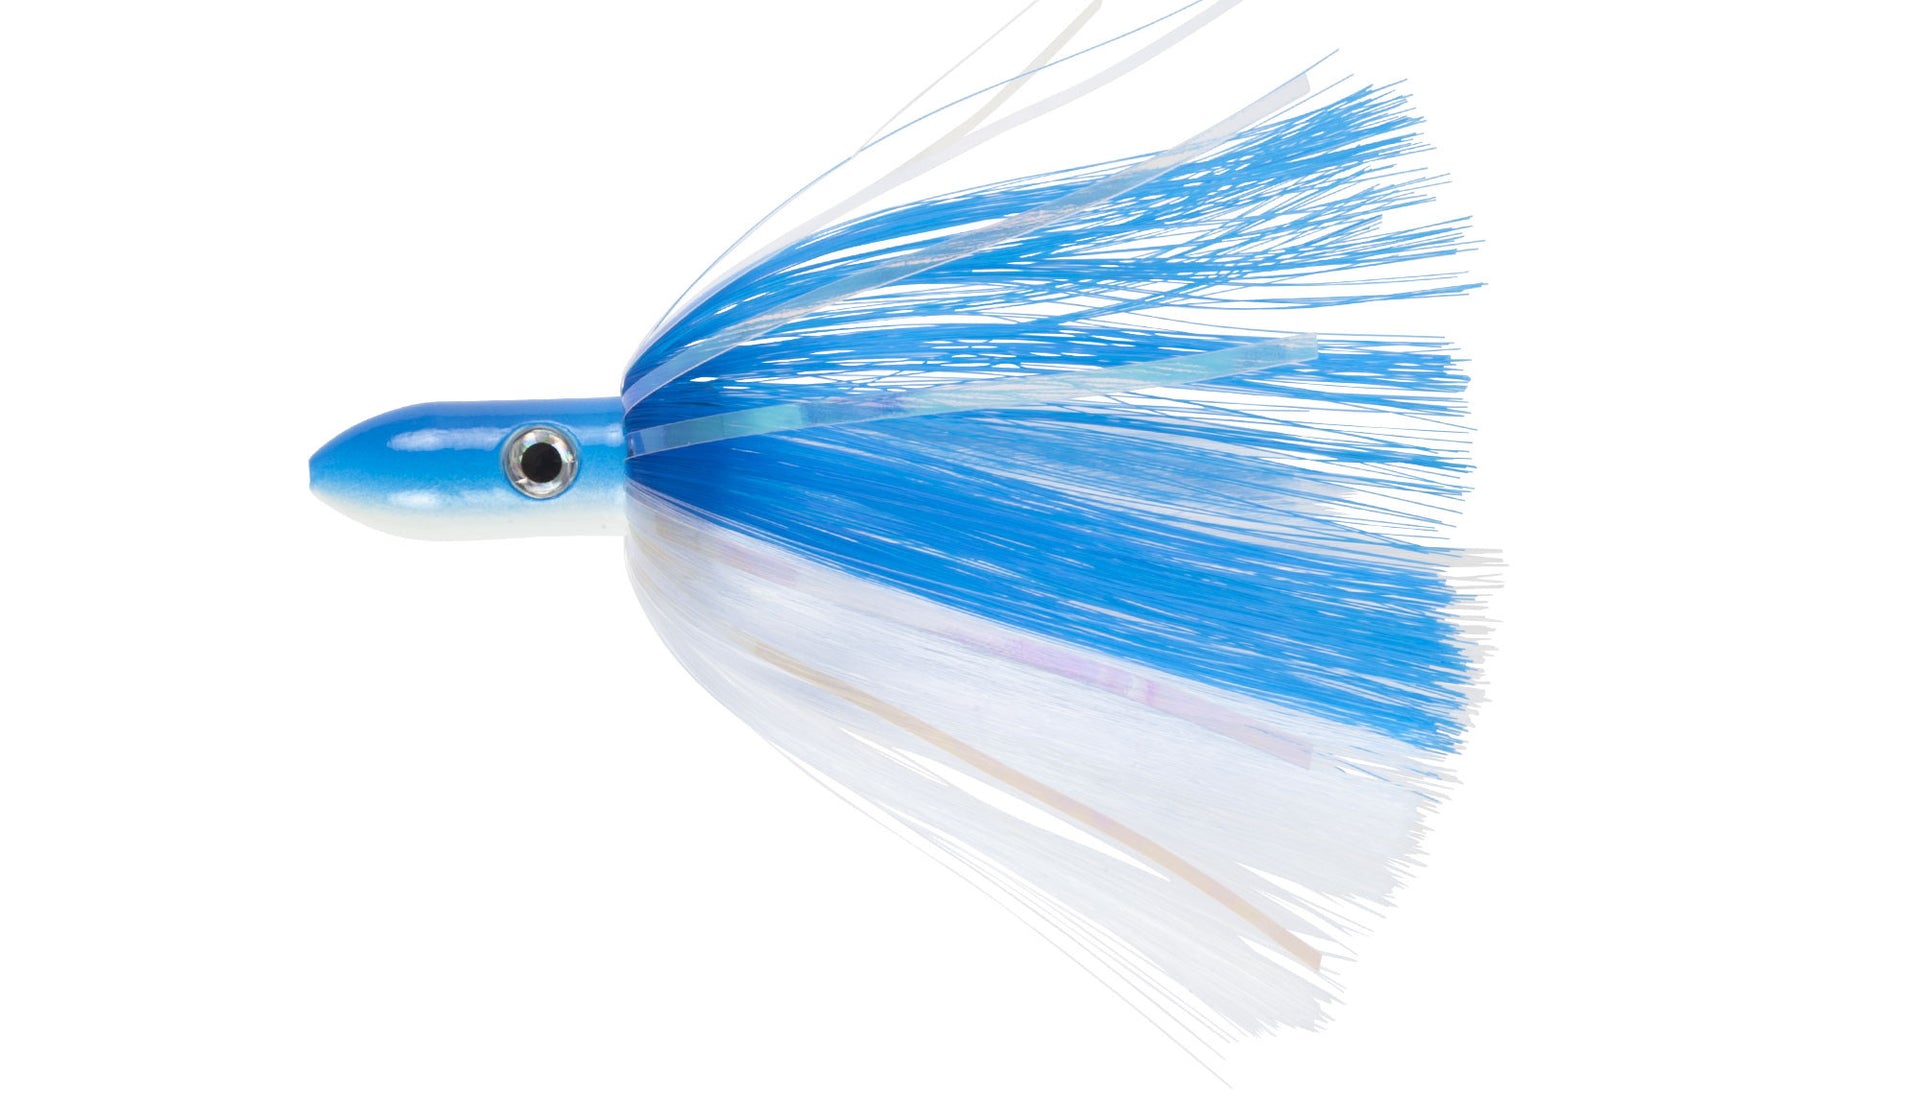 Joe Shute Lures - Tuna Lures that have proven the test of time